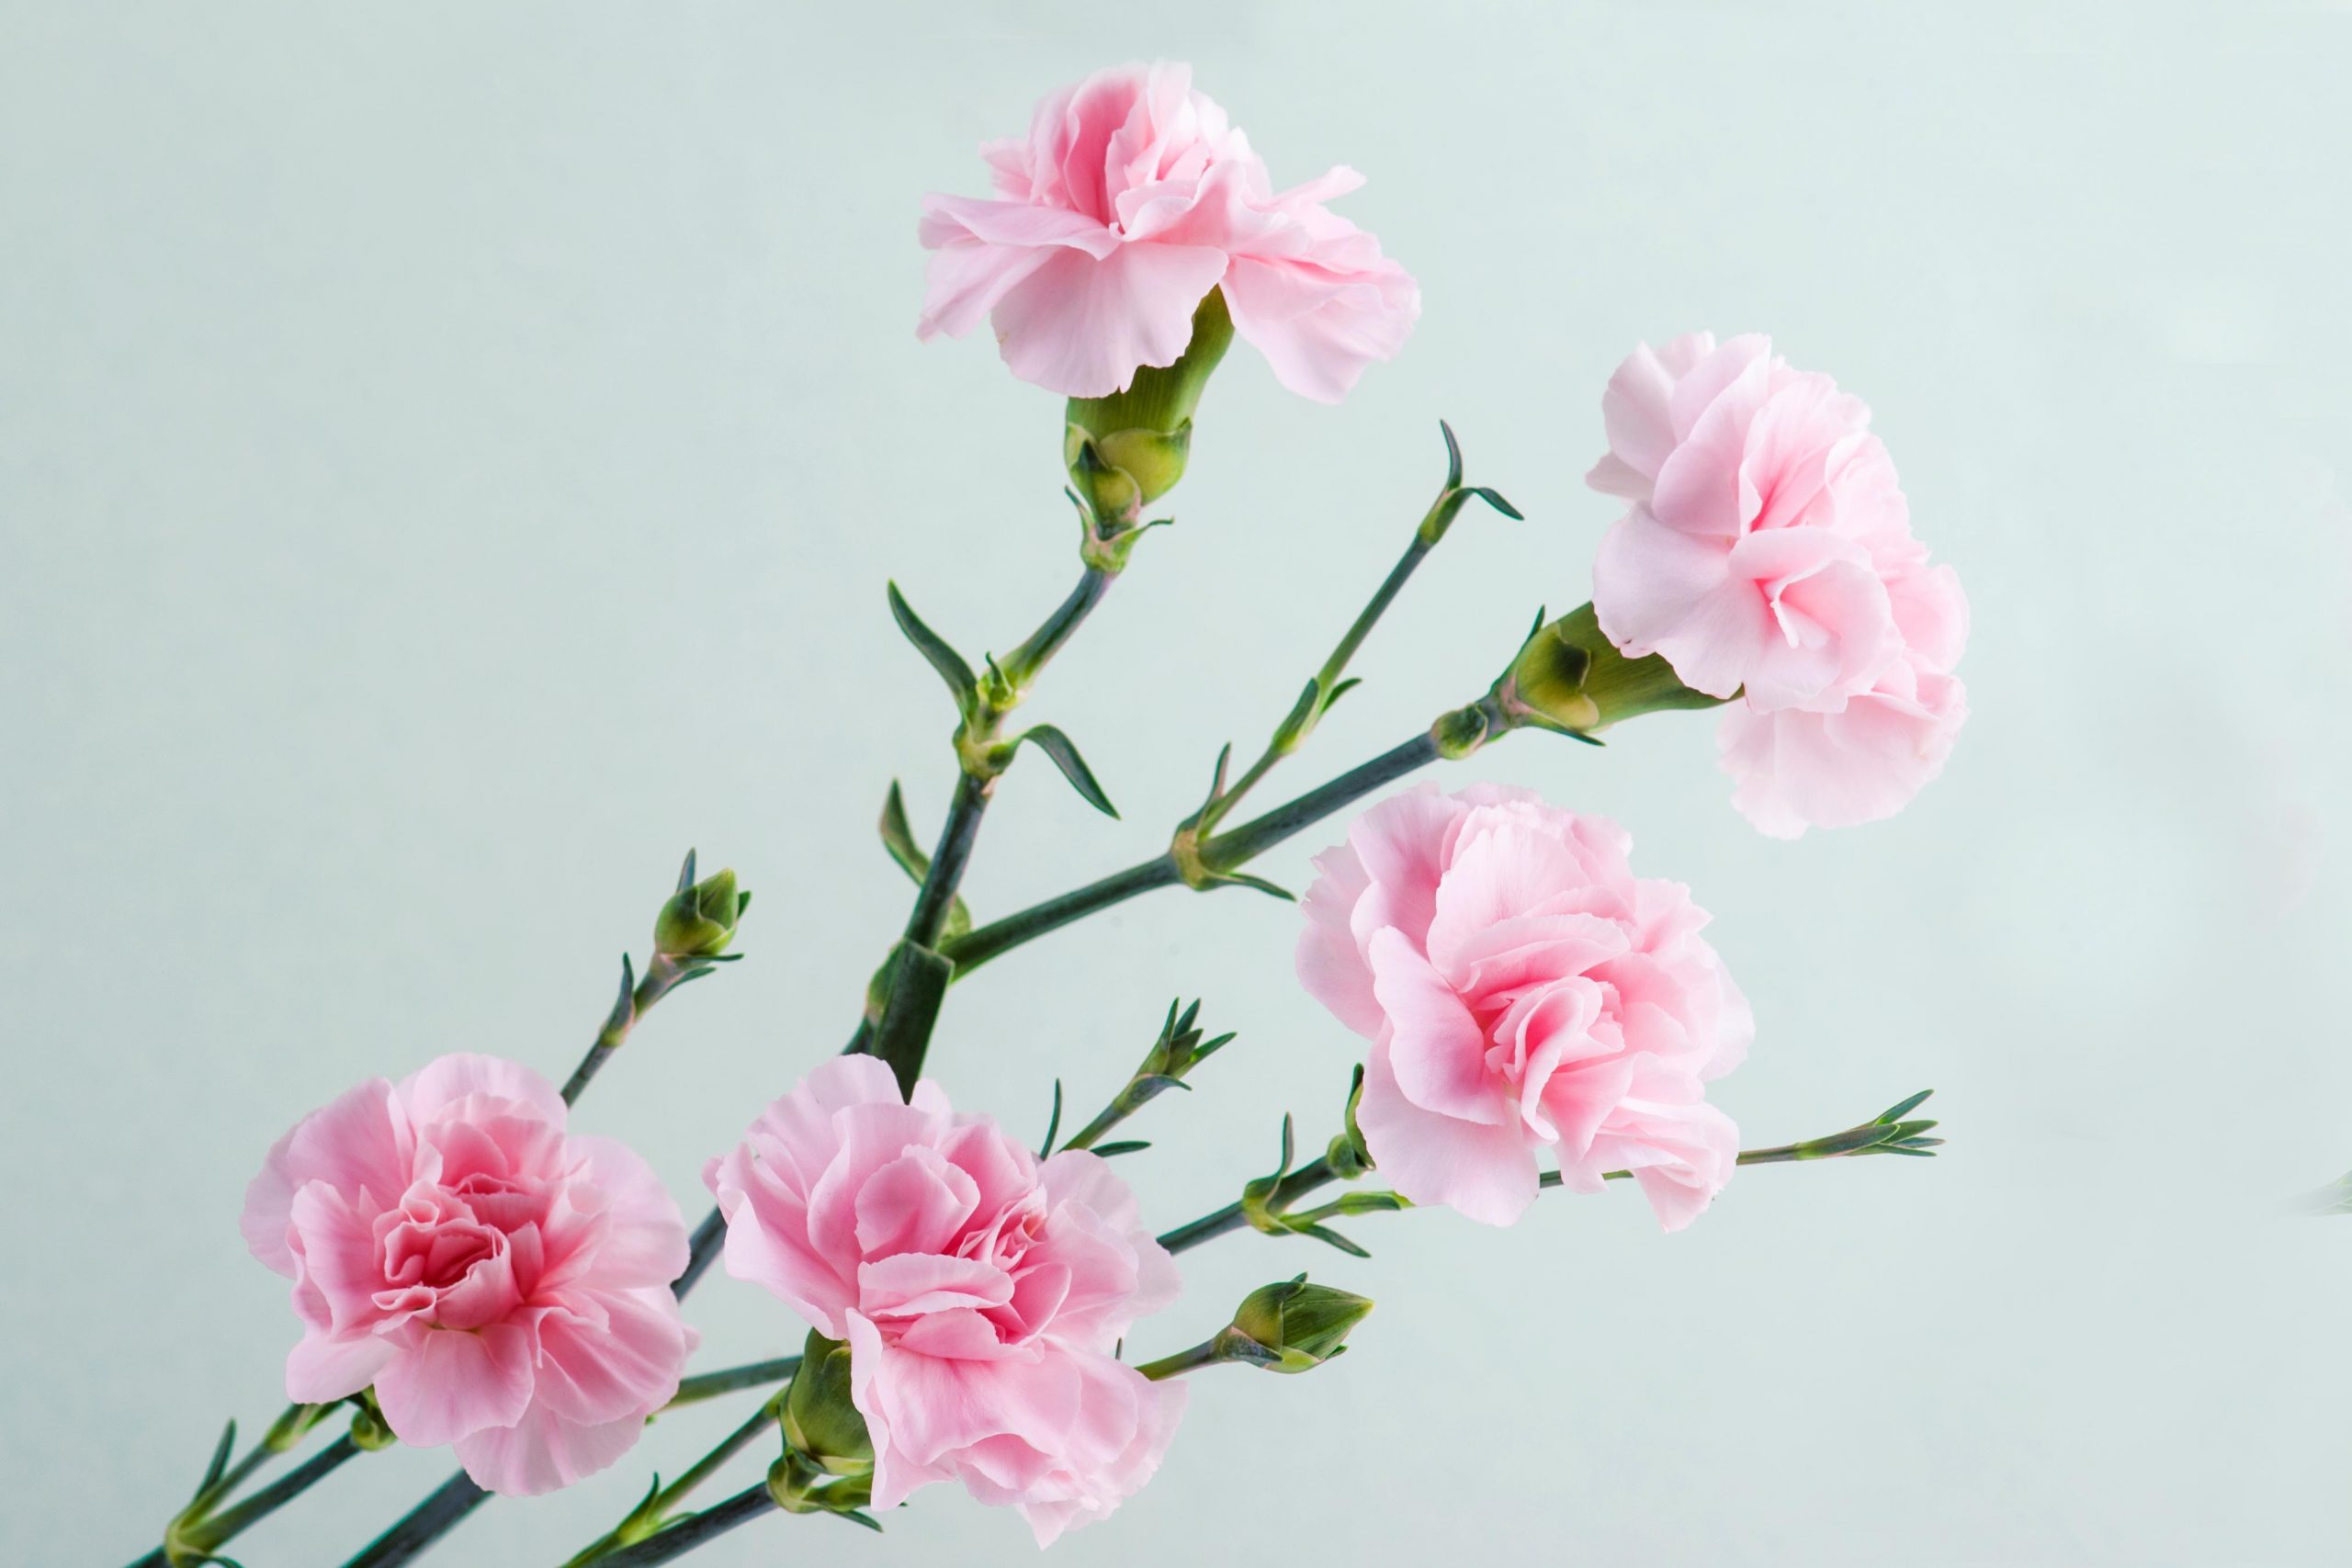 Light Pink Carnation Flowers and Stems on Colored background